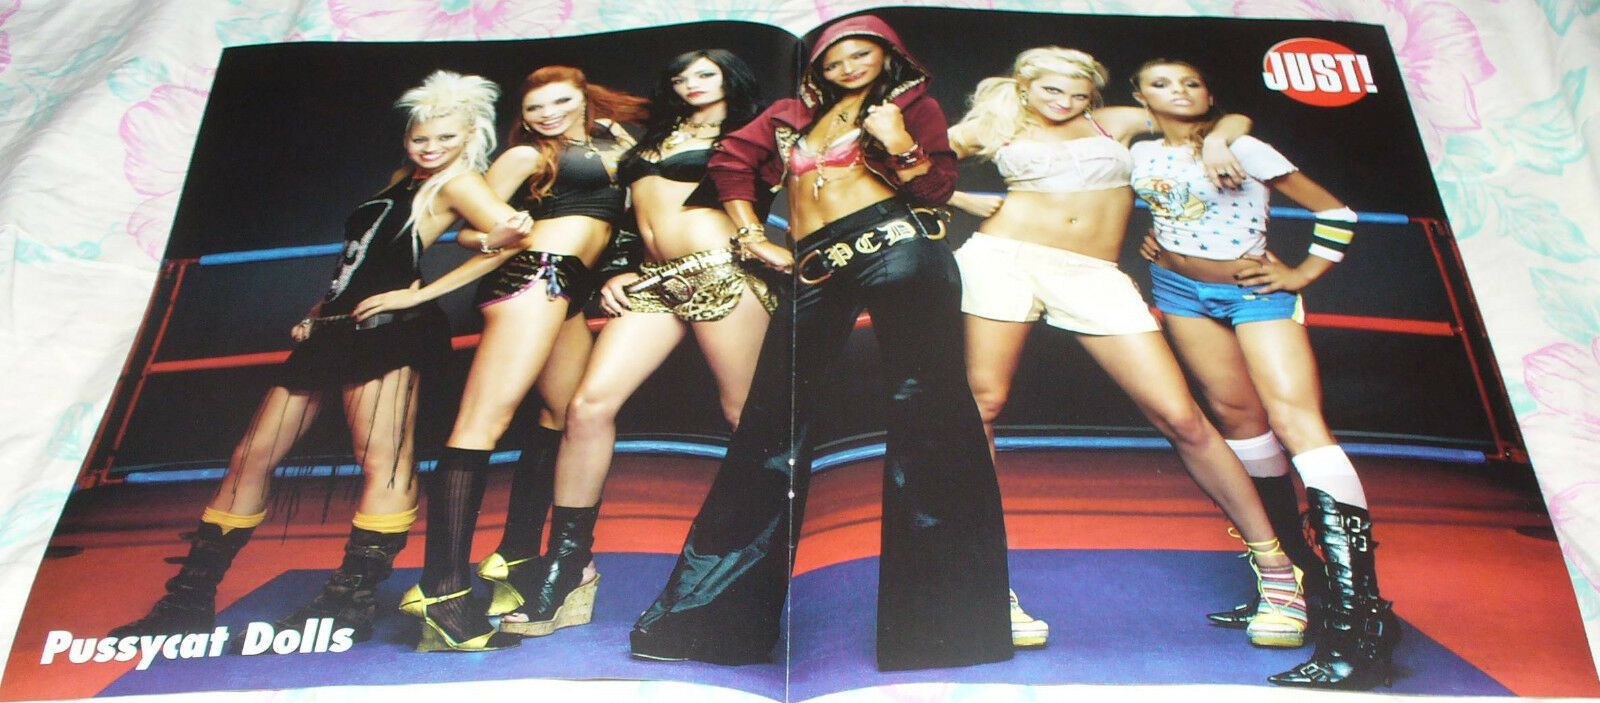 ESTONIAN JUST! CENTERFOLD POSTER WITH Pussycat Dolls